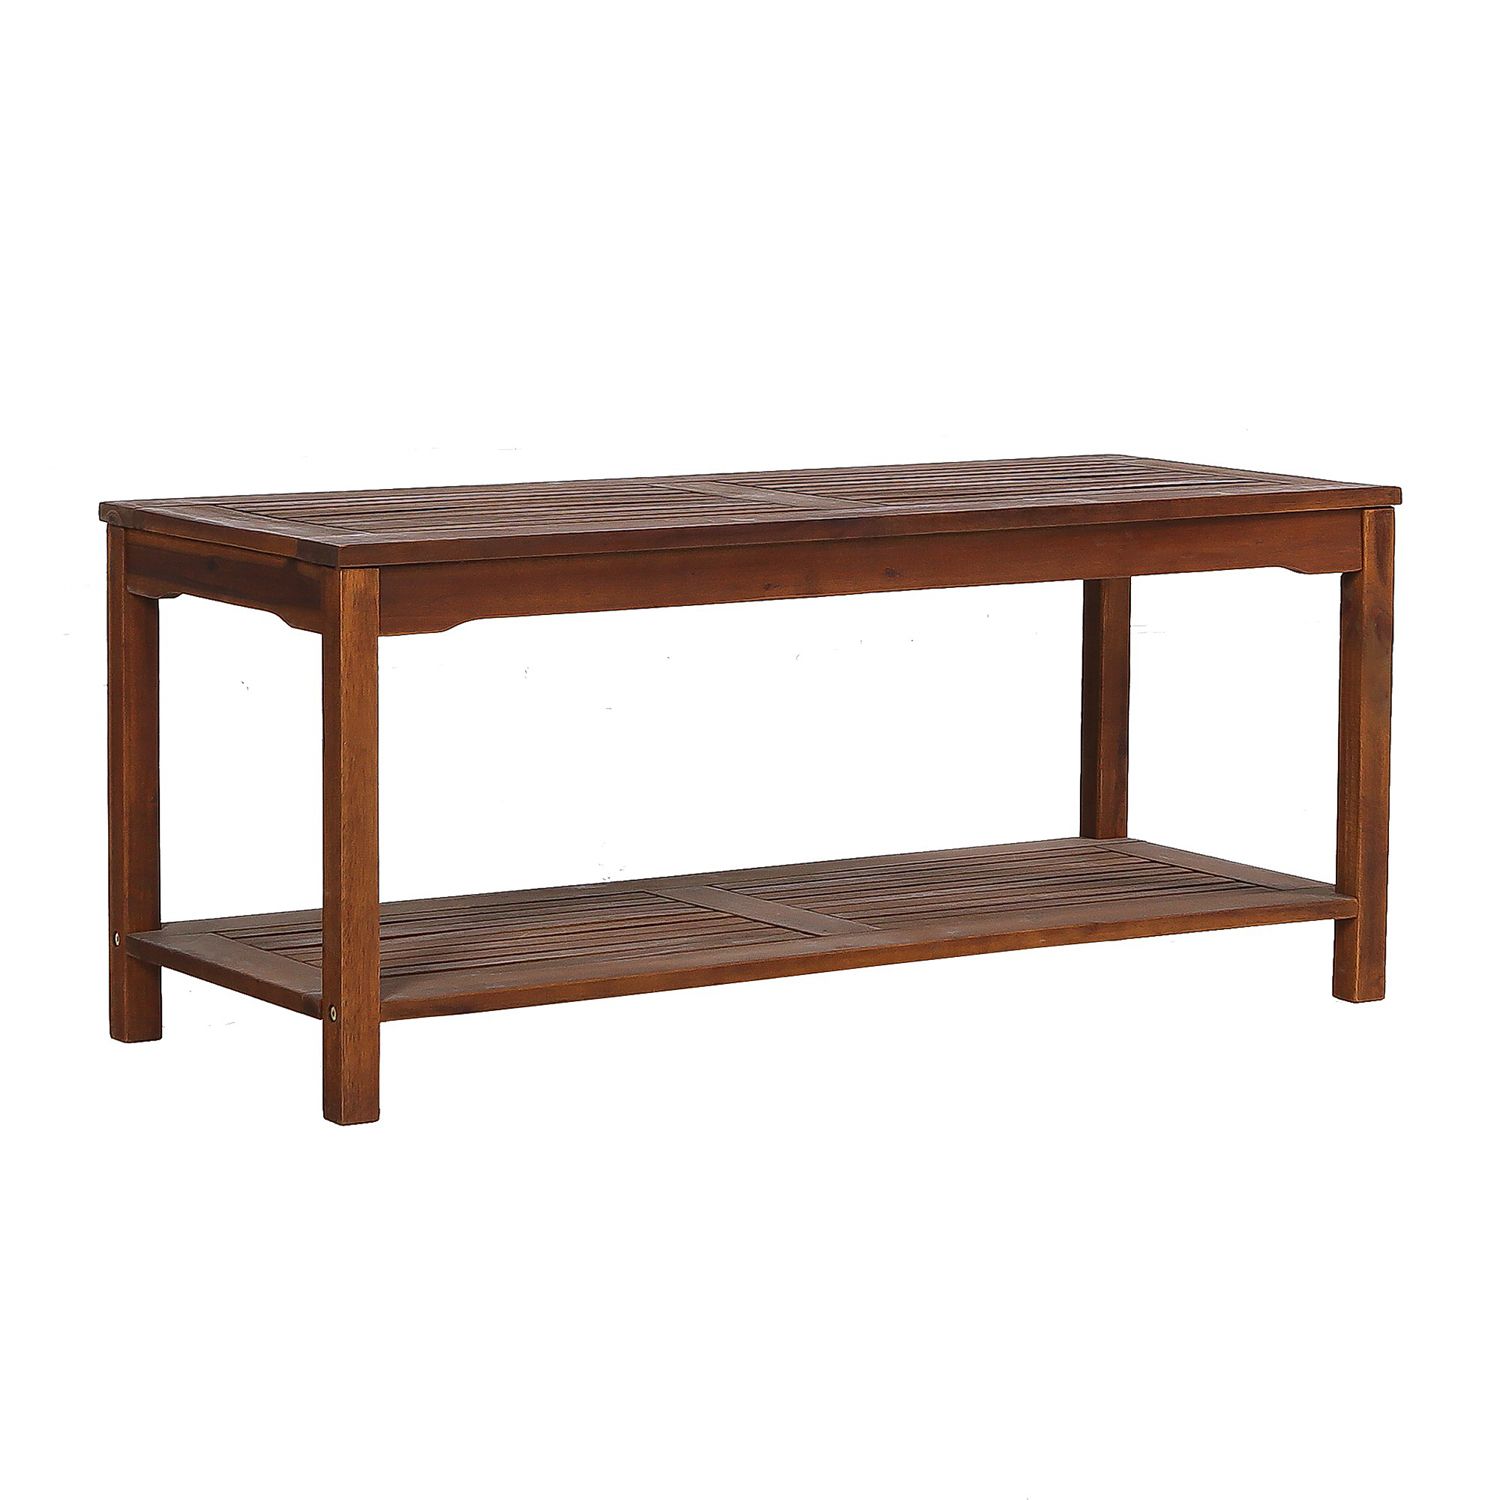 Acacia Wood Patio Coffee Table – Pier1 Imports Pertaining To Well Known Natural Dark Oil Acacia Outdoor Arm Chairs (View 4 of 15)